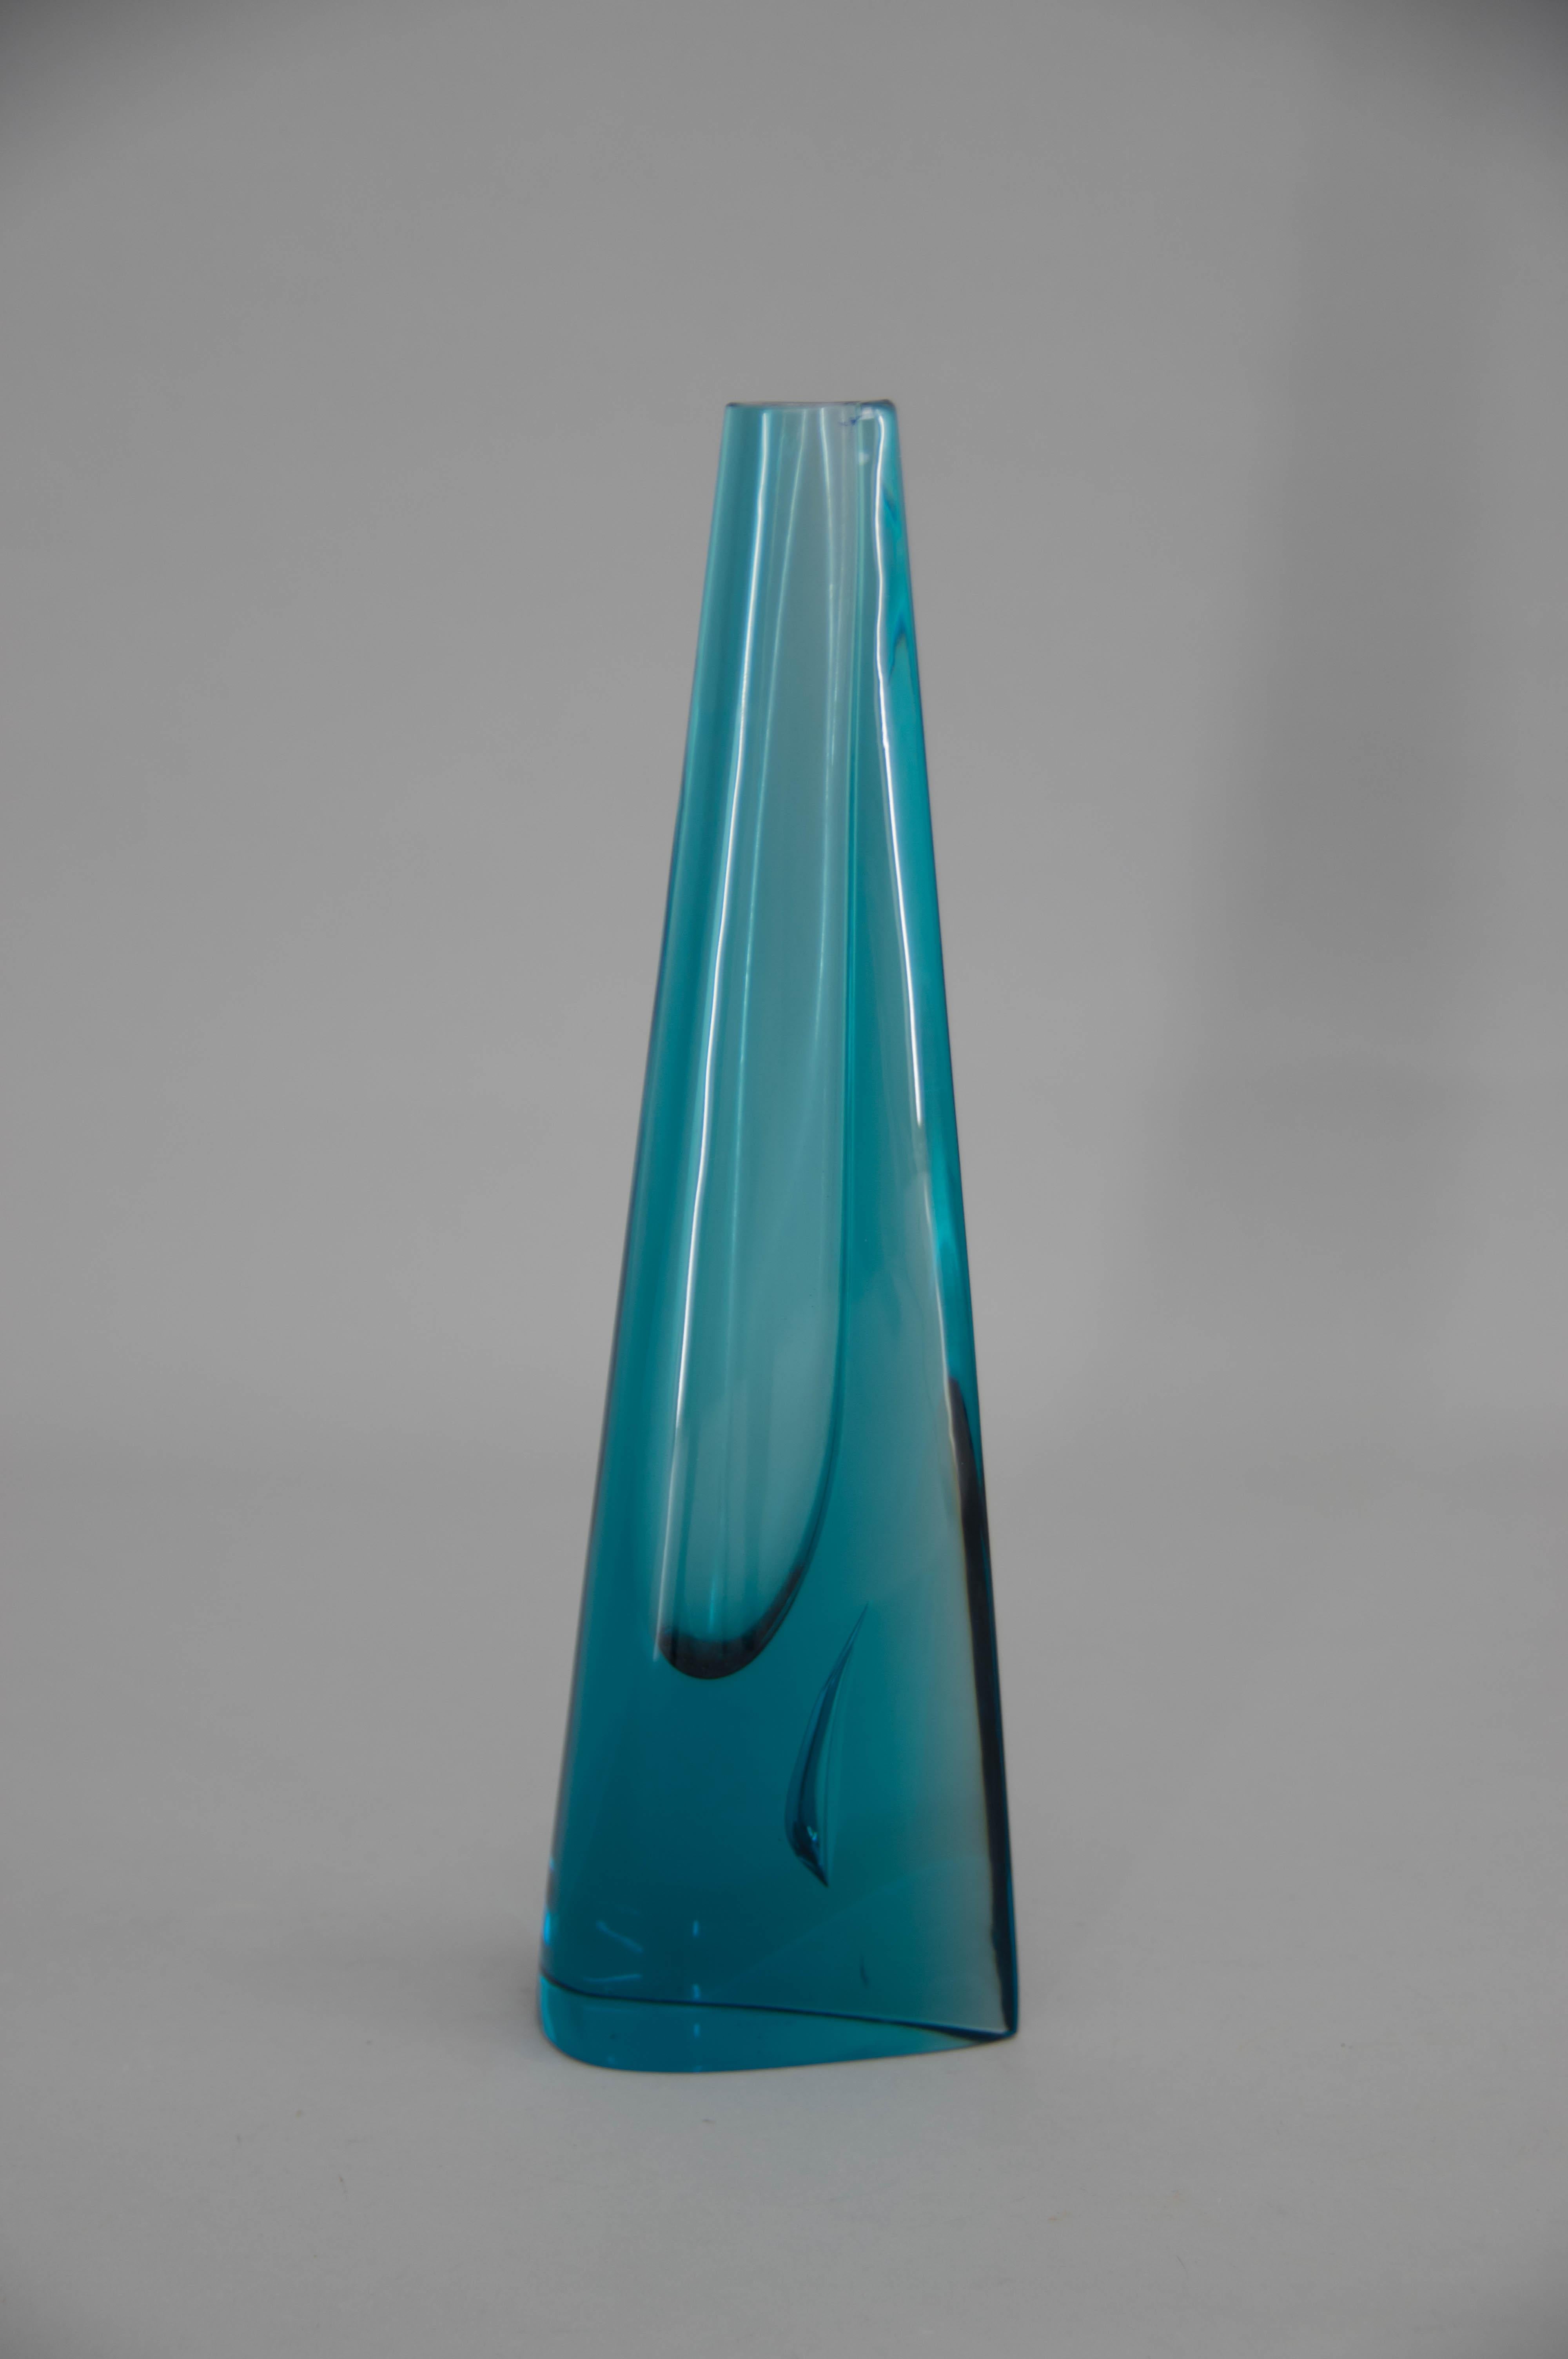 One flower vase. Made in Czechoslovakia in 1960s.
Very good condition.